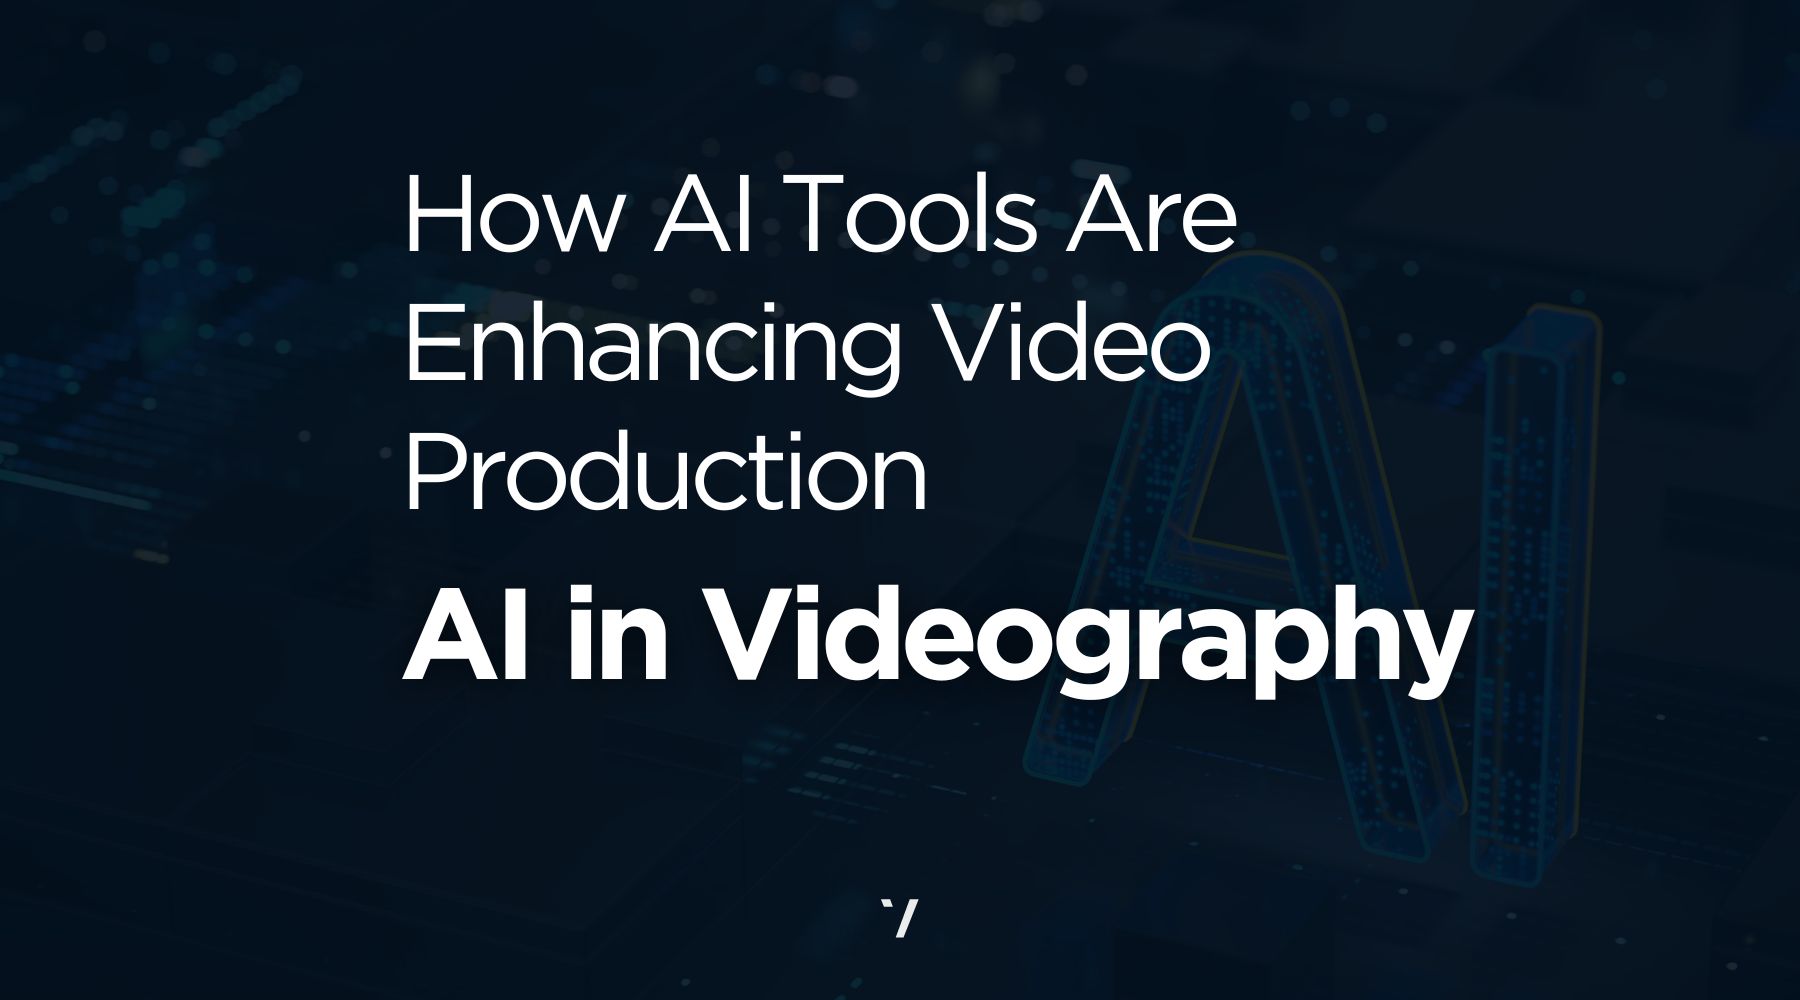 Revolutionising Videography: How AI Tools Are Enhancing Video Production